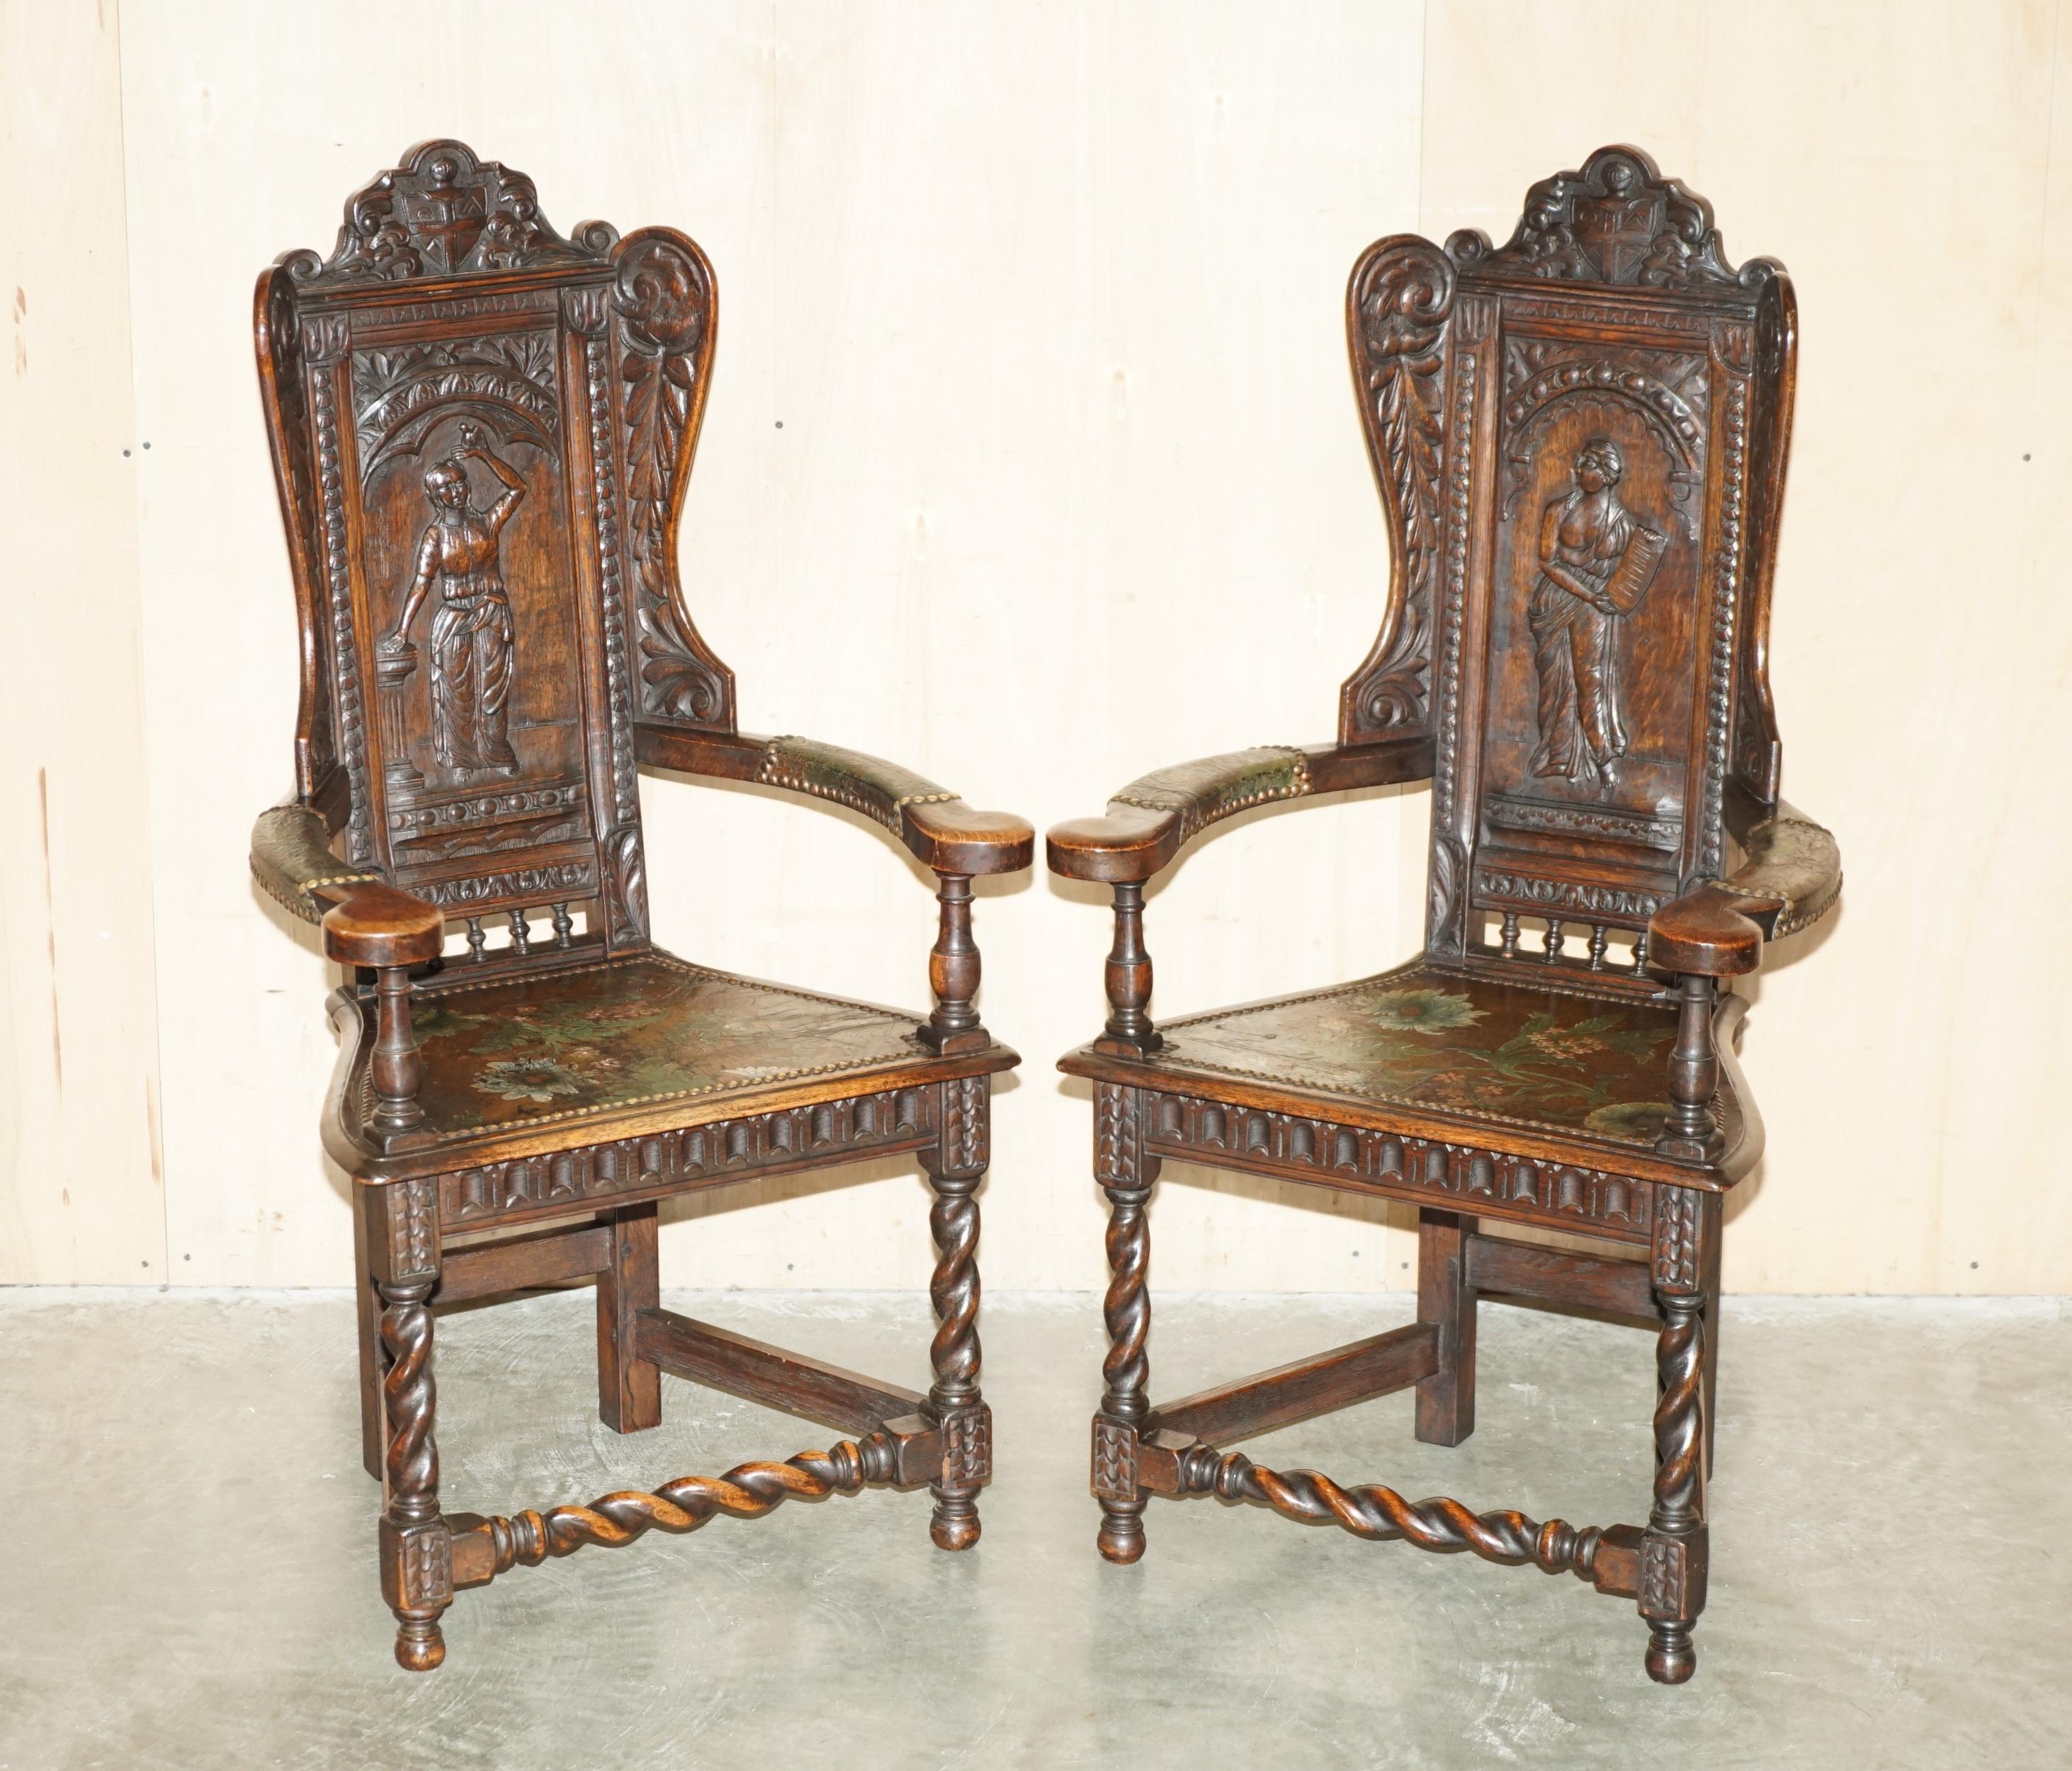 Royal House Antiques

Royal House Antiques is delighted to offer for sale this super rare suite of four totally original 17th century circa 1640-1680 French Caquetoire armchairs with ornately carved arms and period, Polychrome painted leather seat